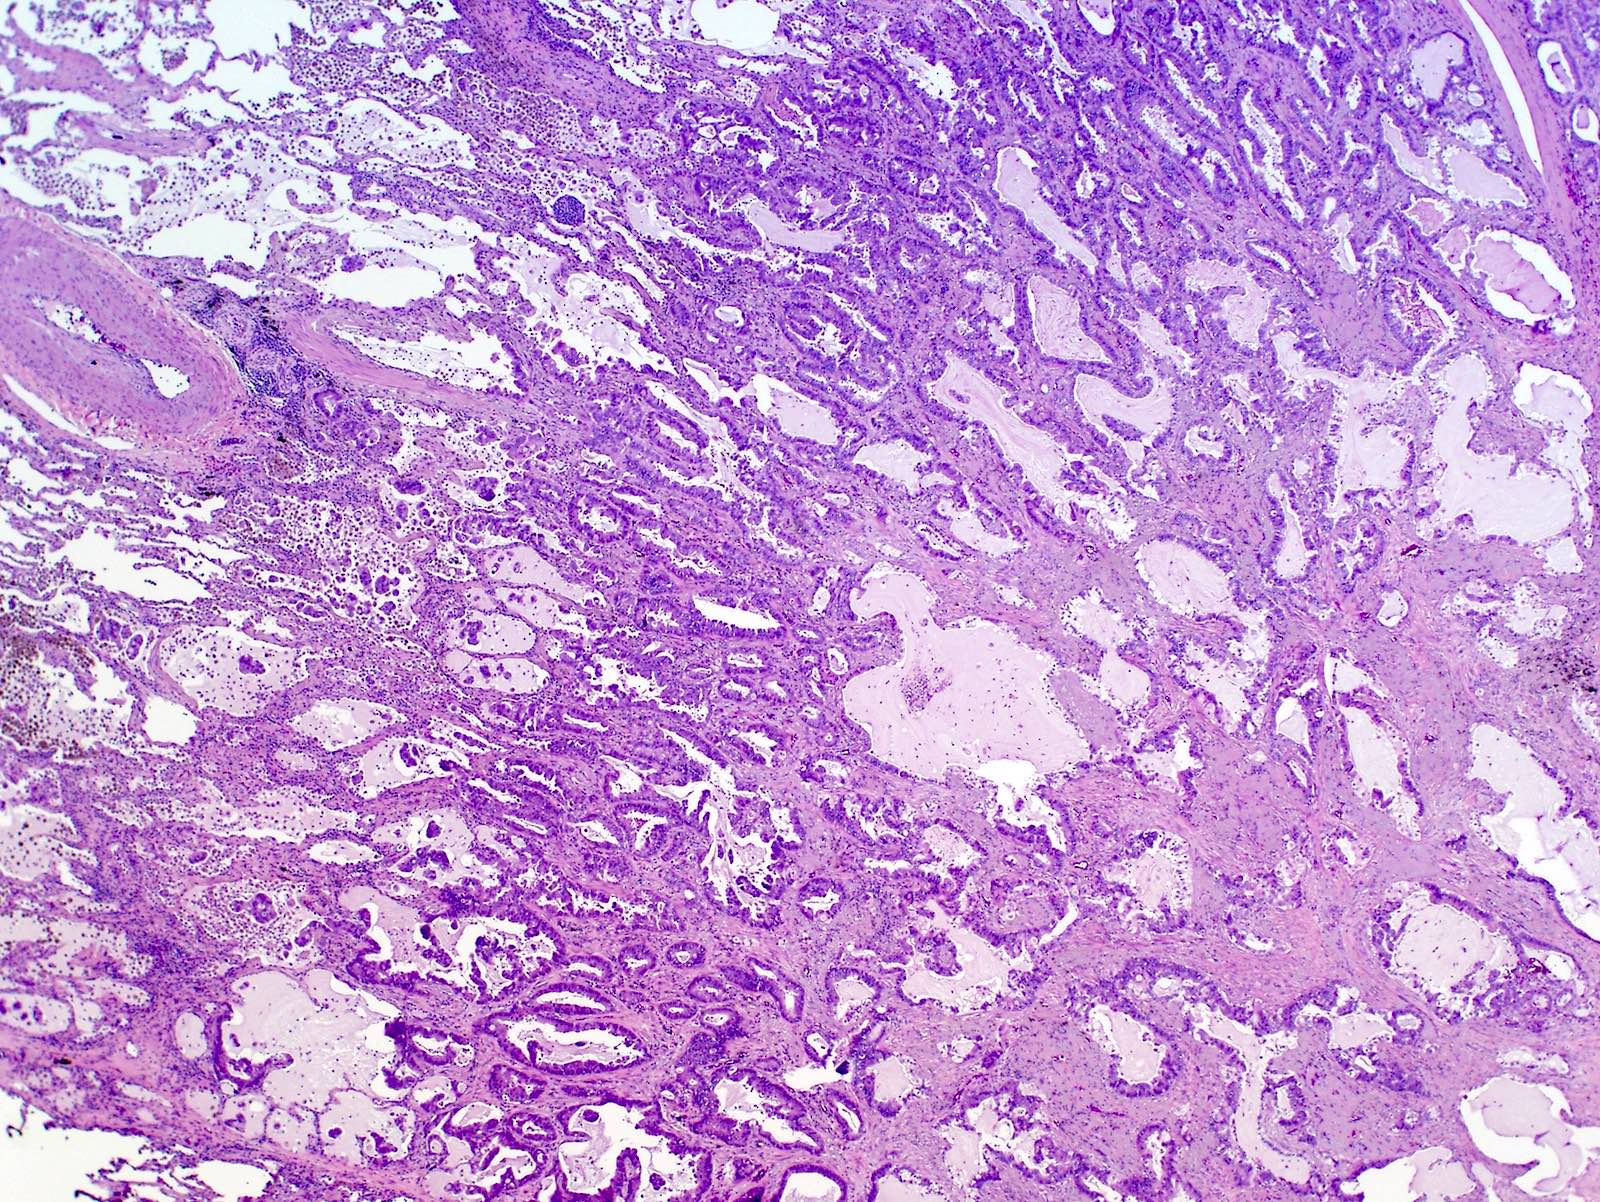 small cell lung cancer histology